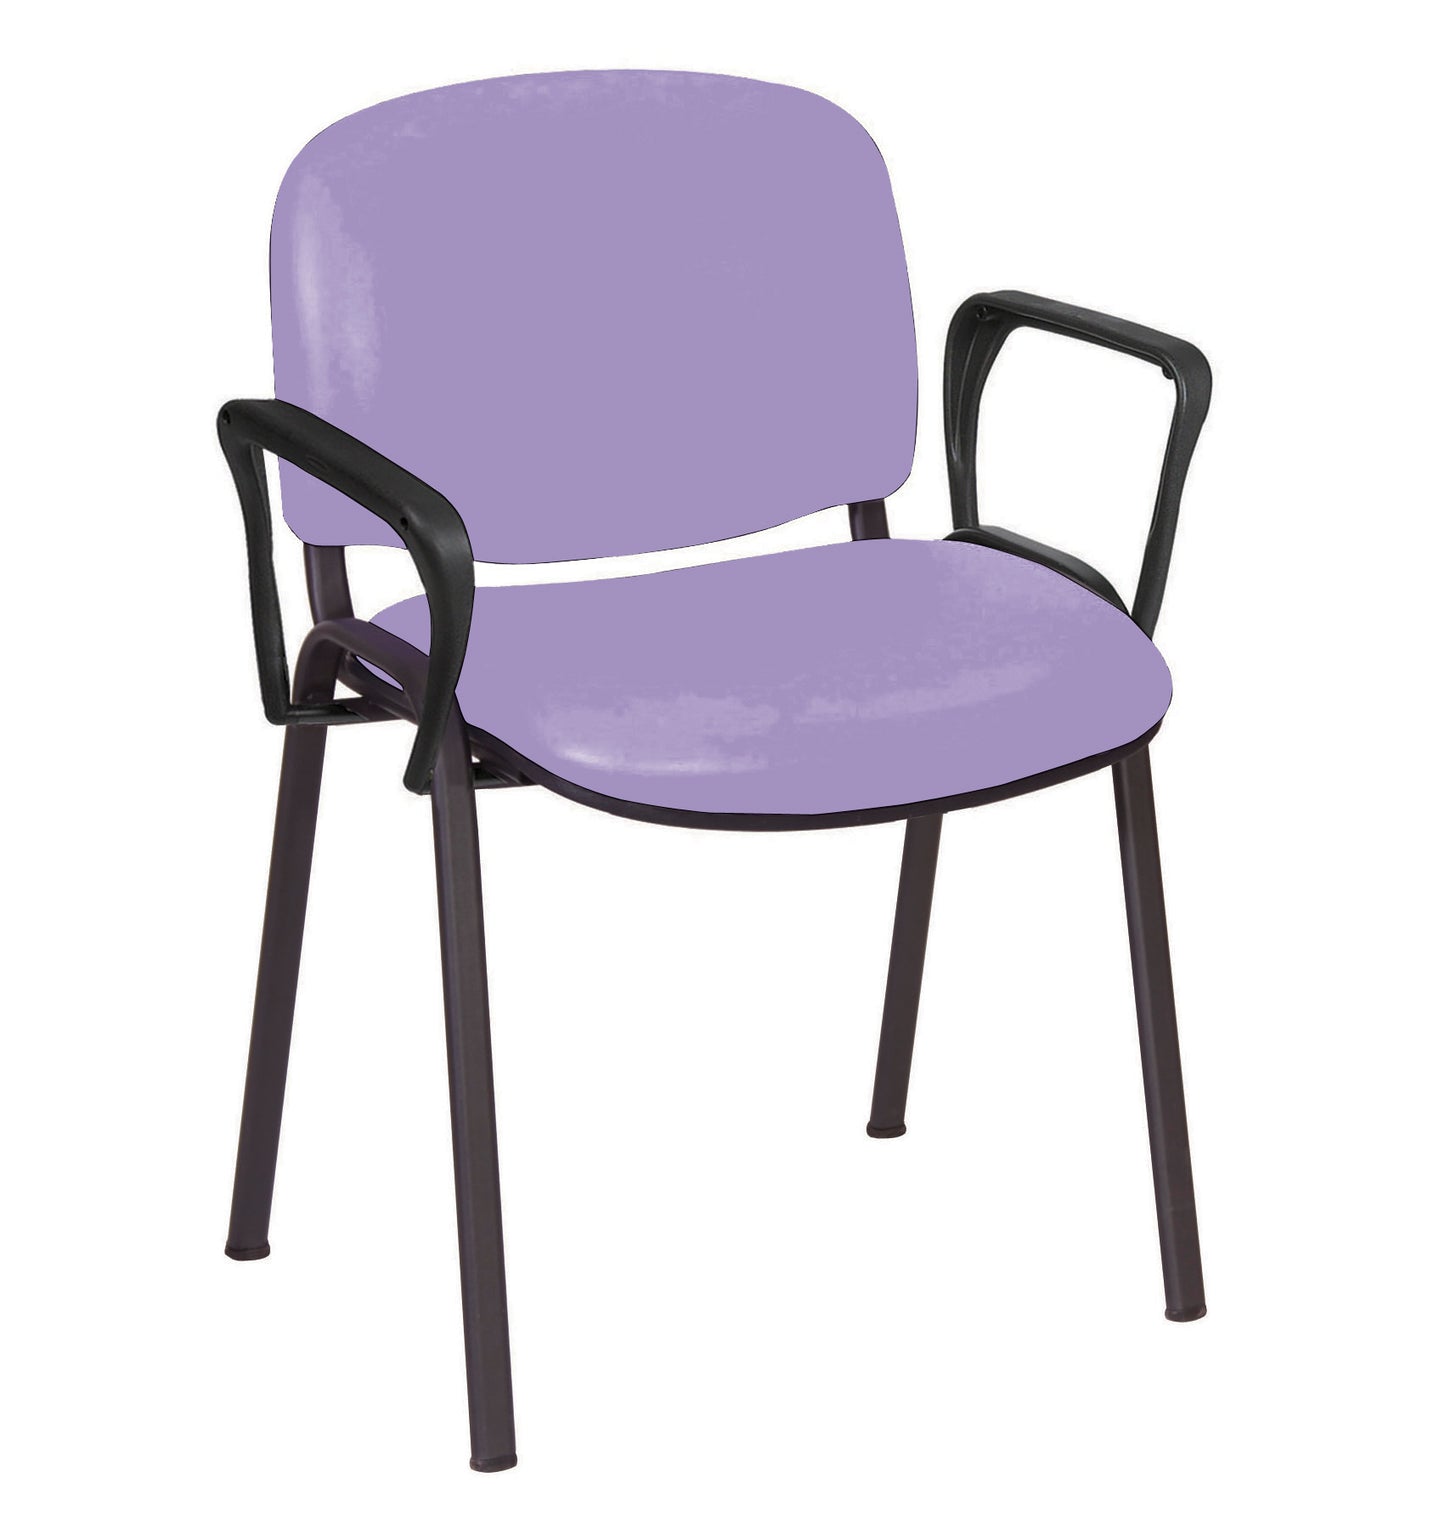 Sunflower - Galaxy Waiting Room Chair With Arms